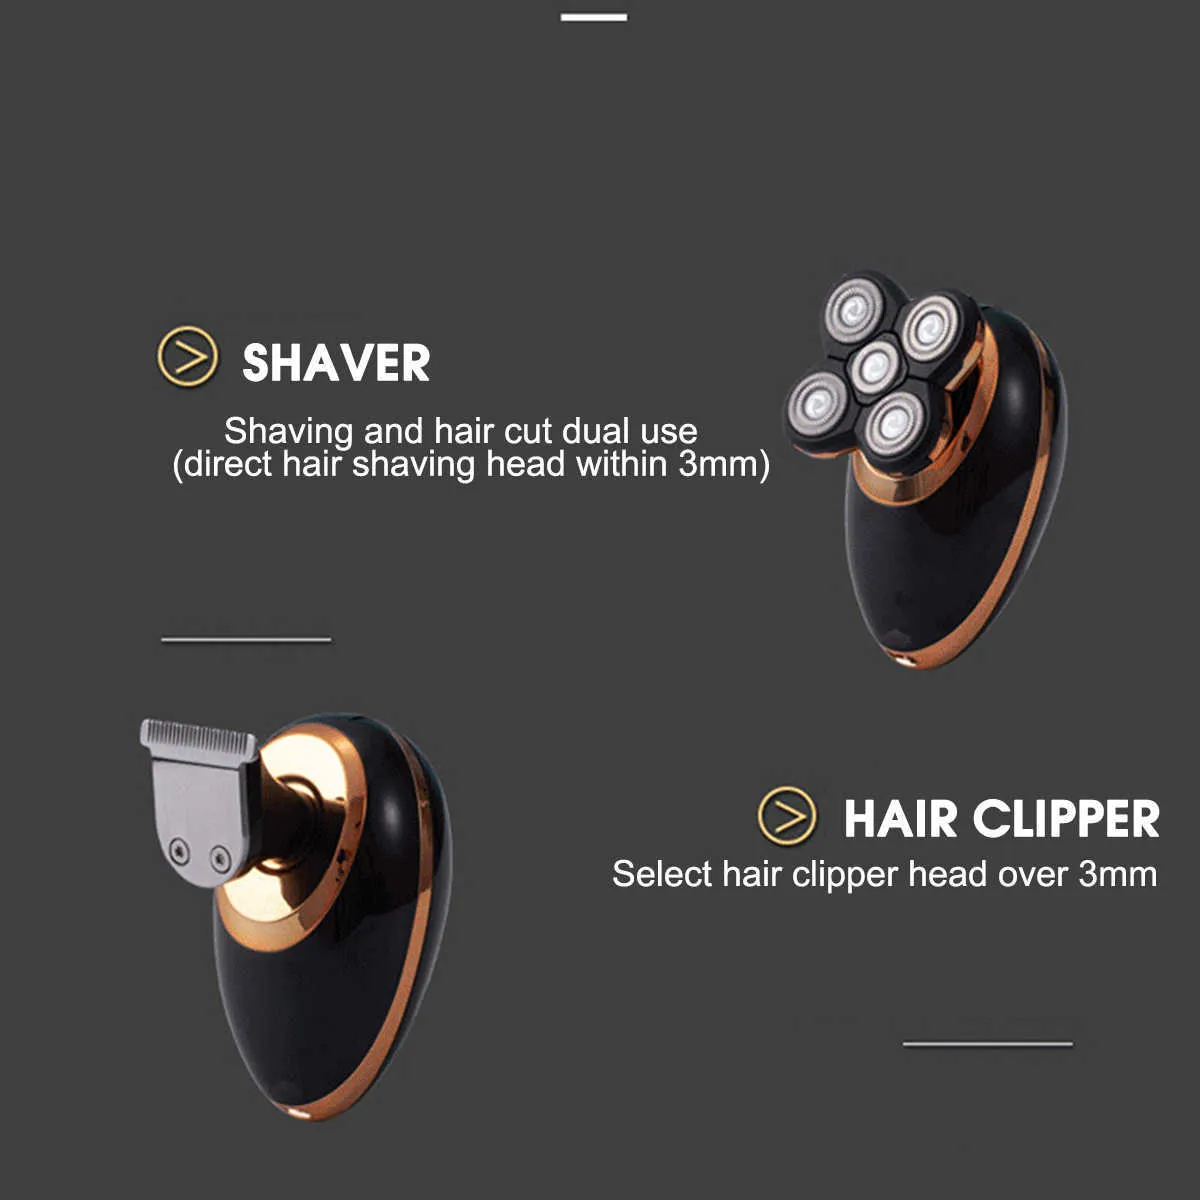 5 In 1 4D Rechargeable Bald Head Electric Shaver Wet&dry Use Waterproof Multipurpose Shaver Washable Floating Shaving Machine P0817